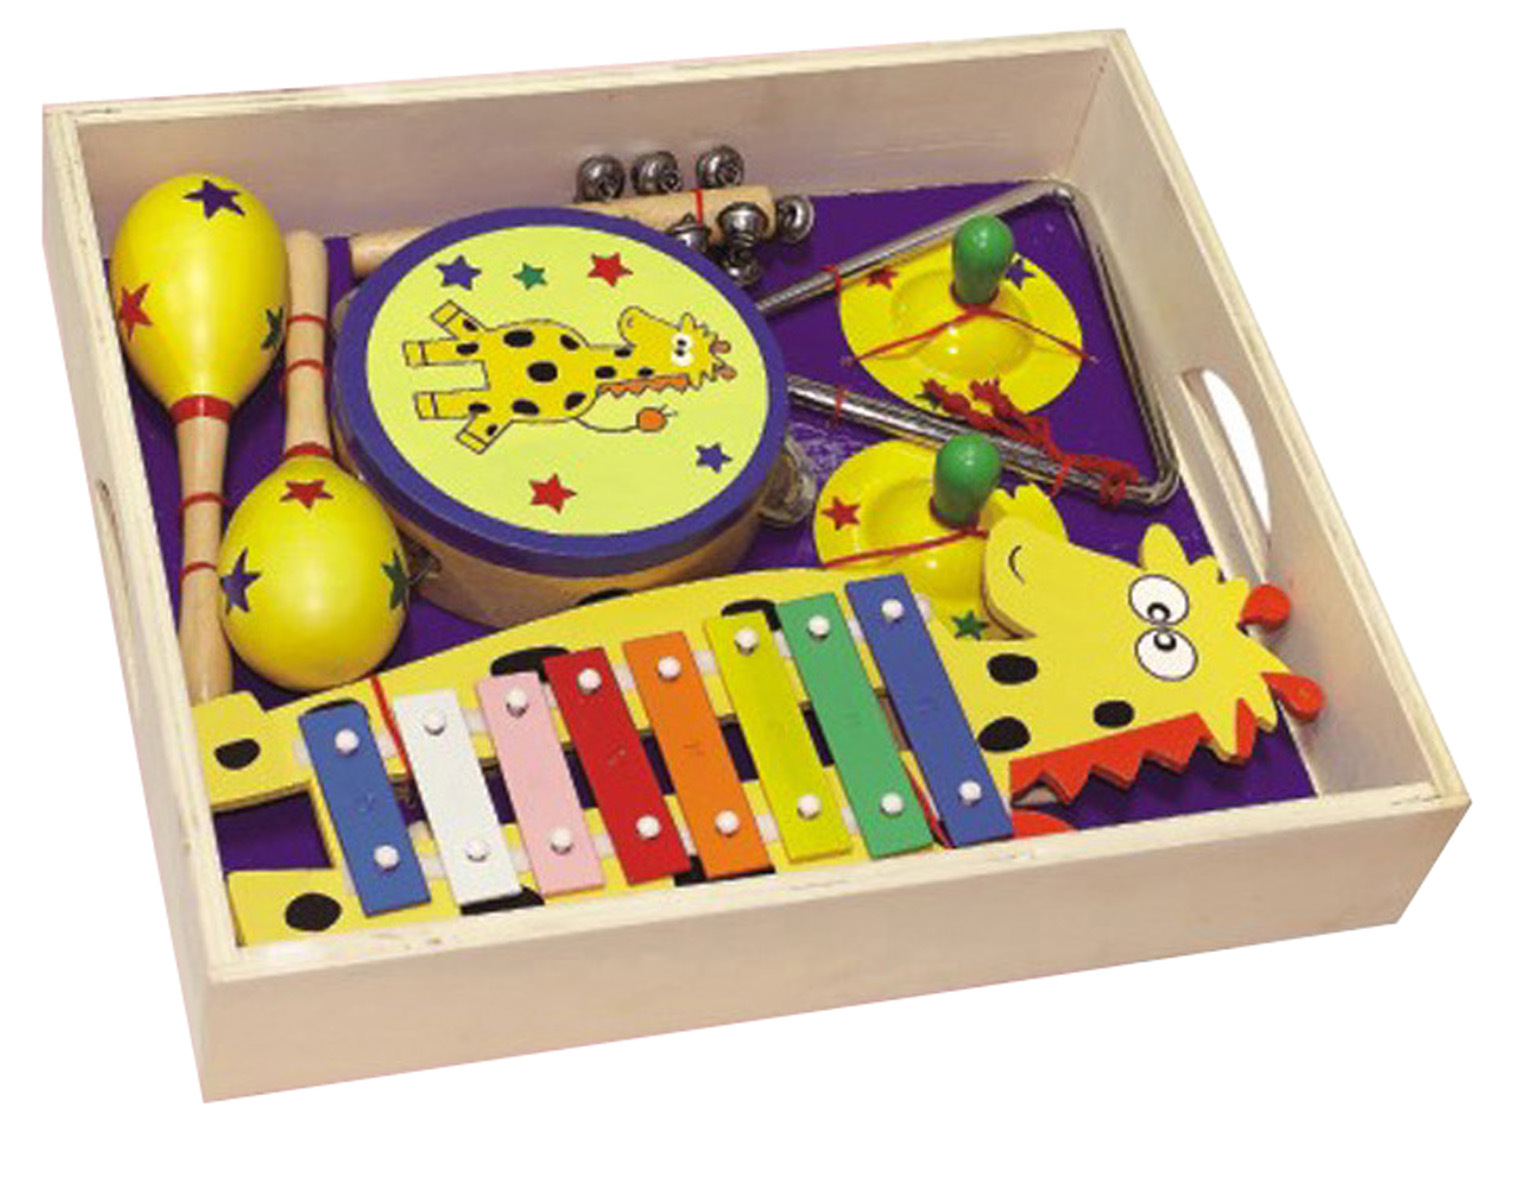 Wooden Musical Instrument Toys in a Box